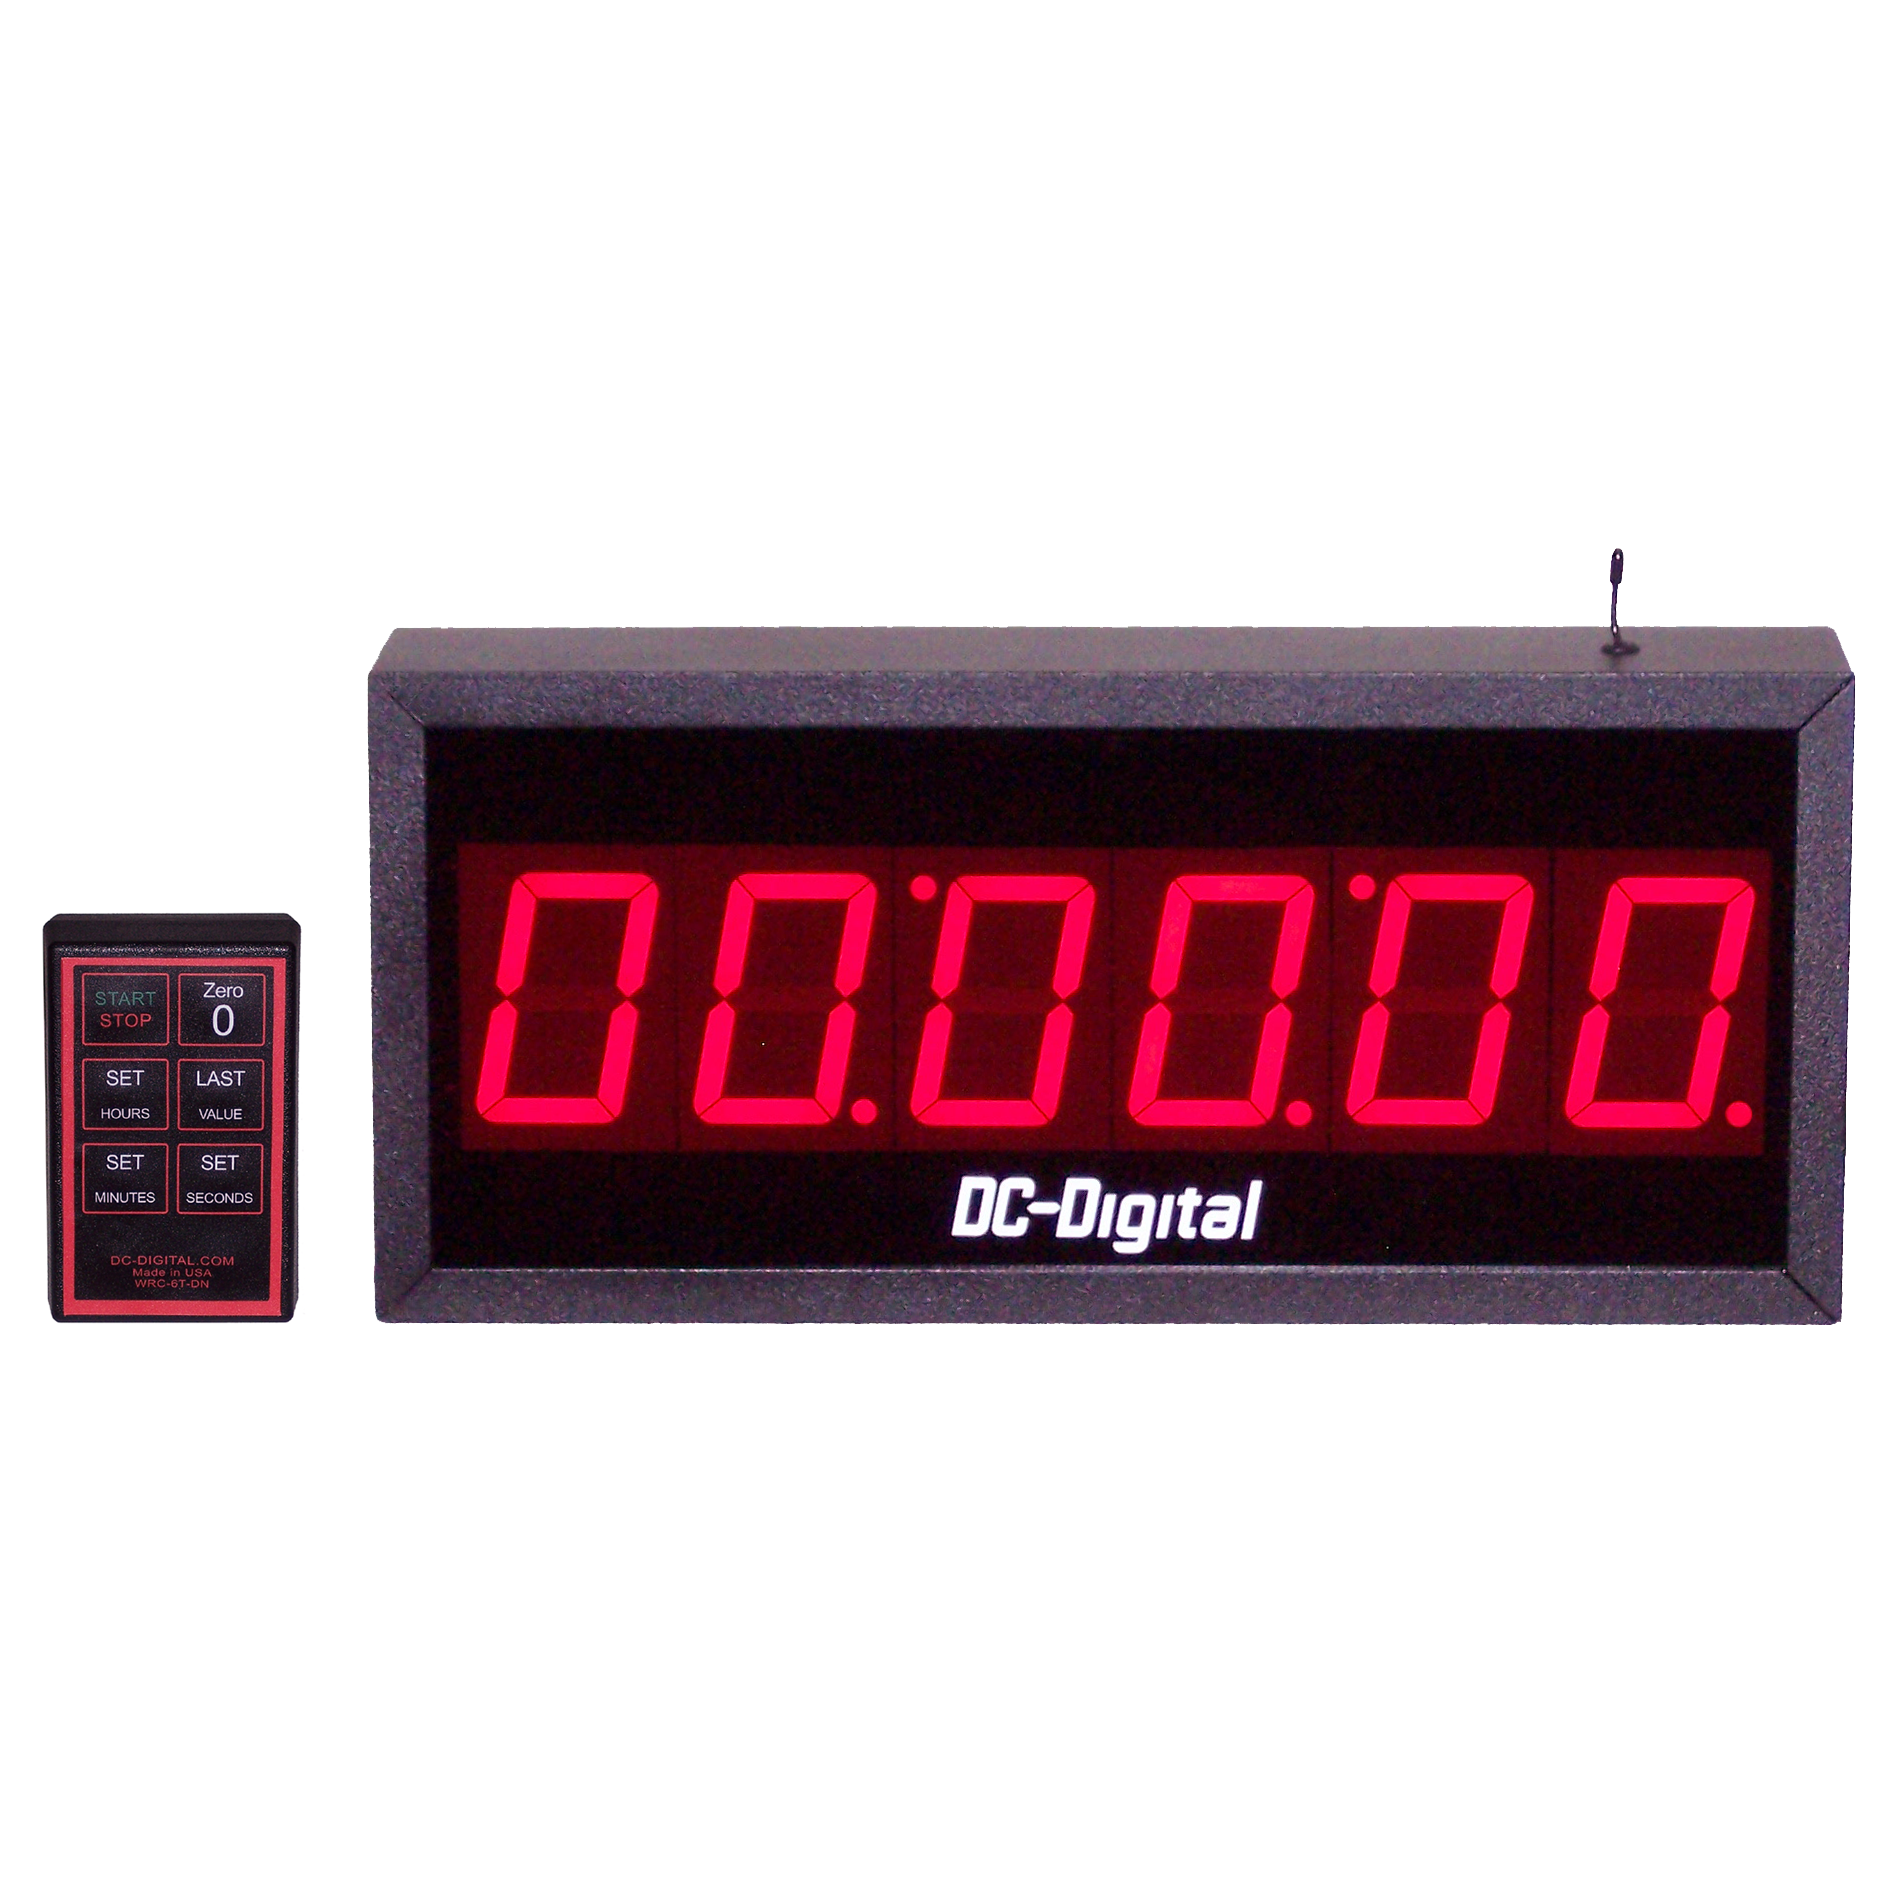 Remote-controlled Countdown Timer